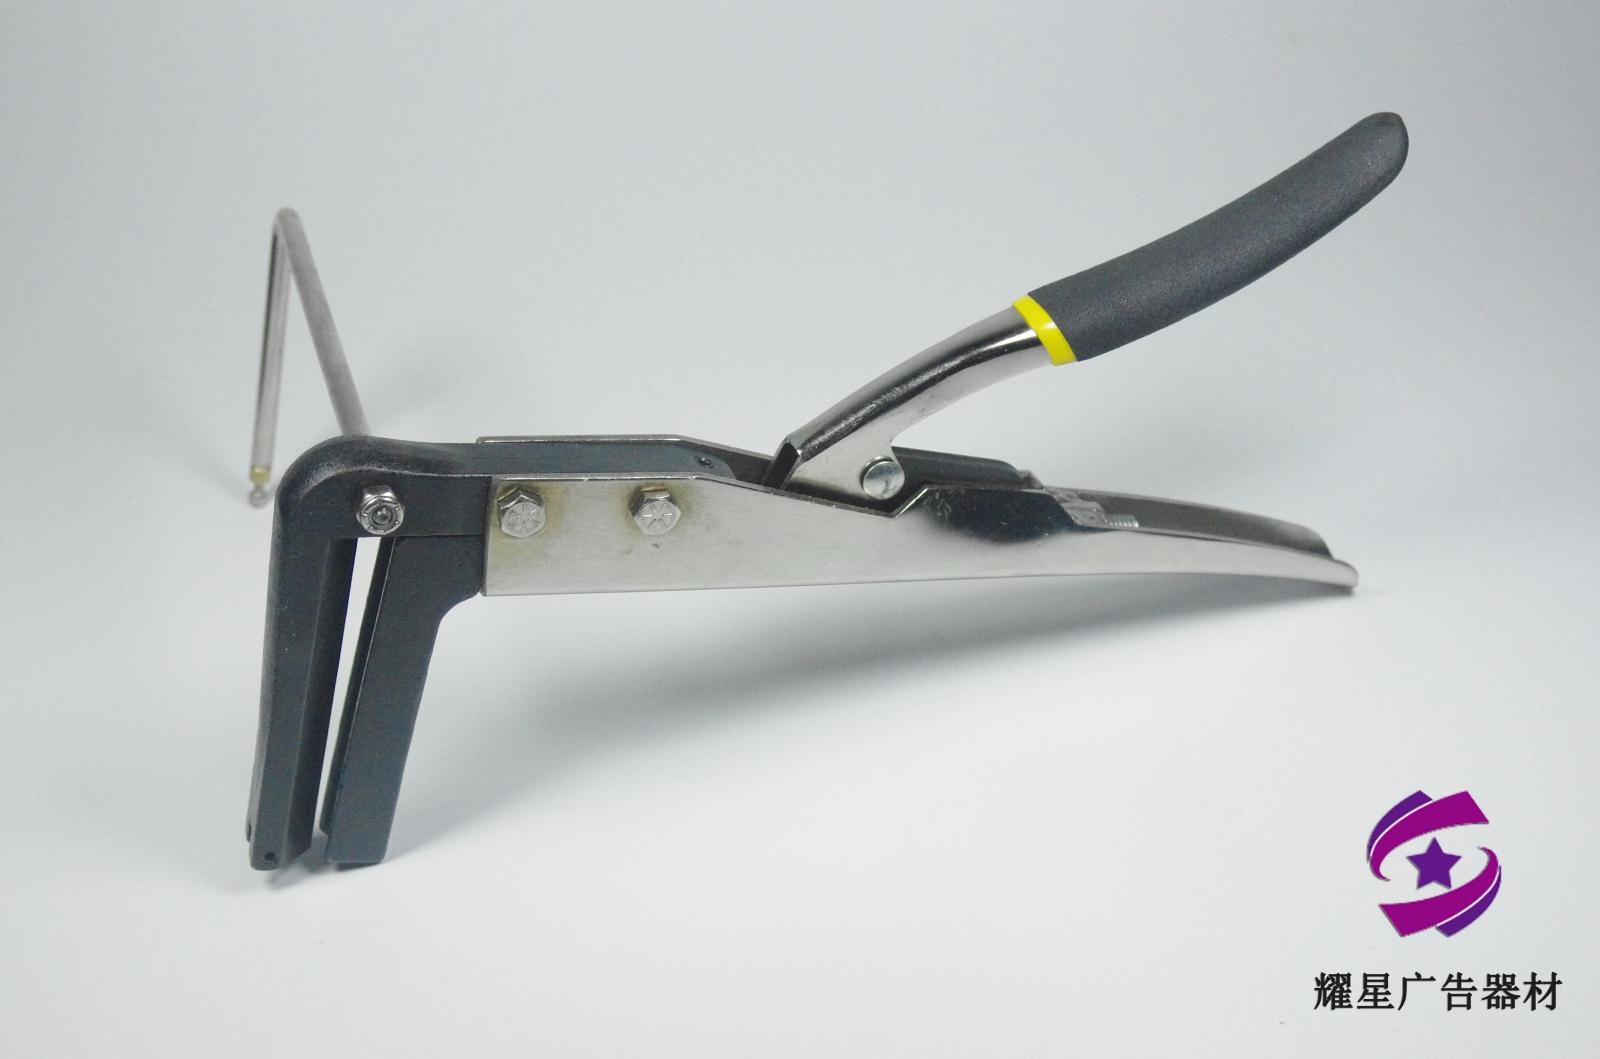 Flat aluminum edge penguin bending jaws no words with right angle bending pliers luminous characters with 8 cm high bend